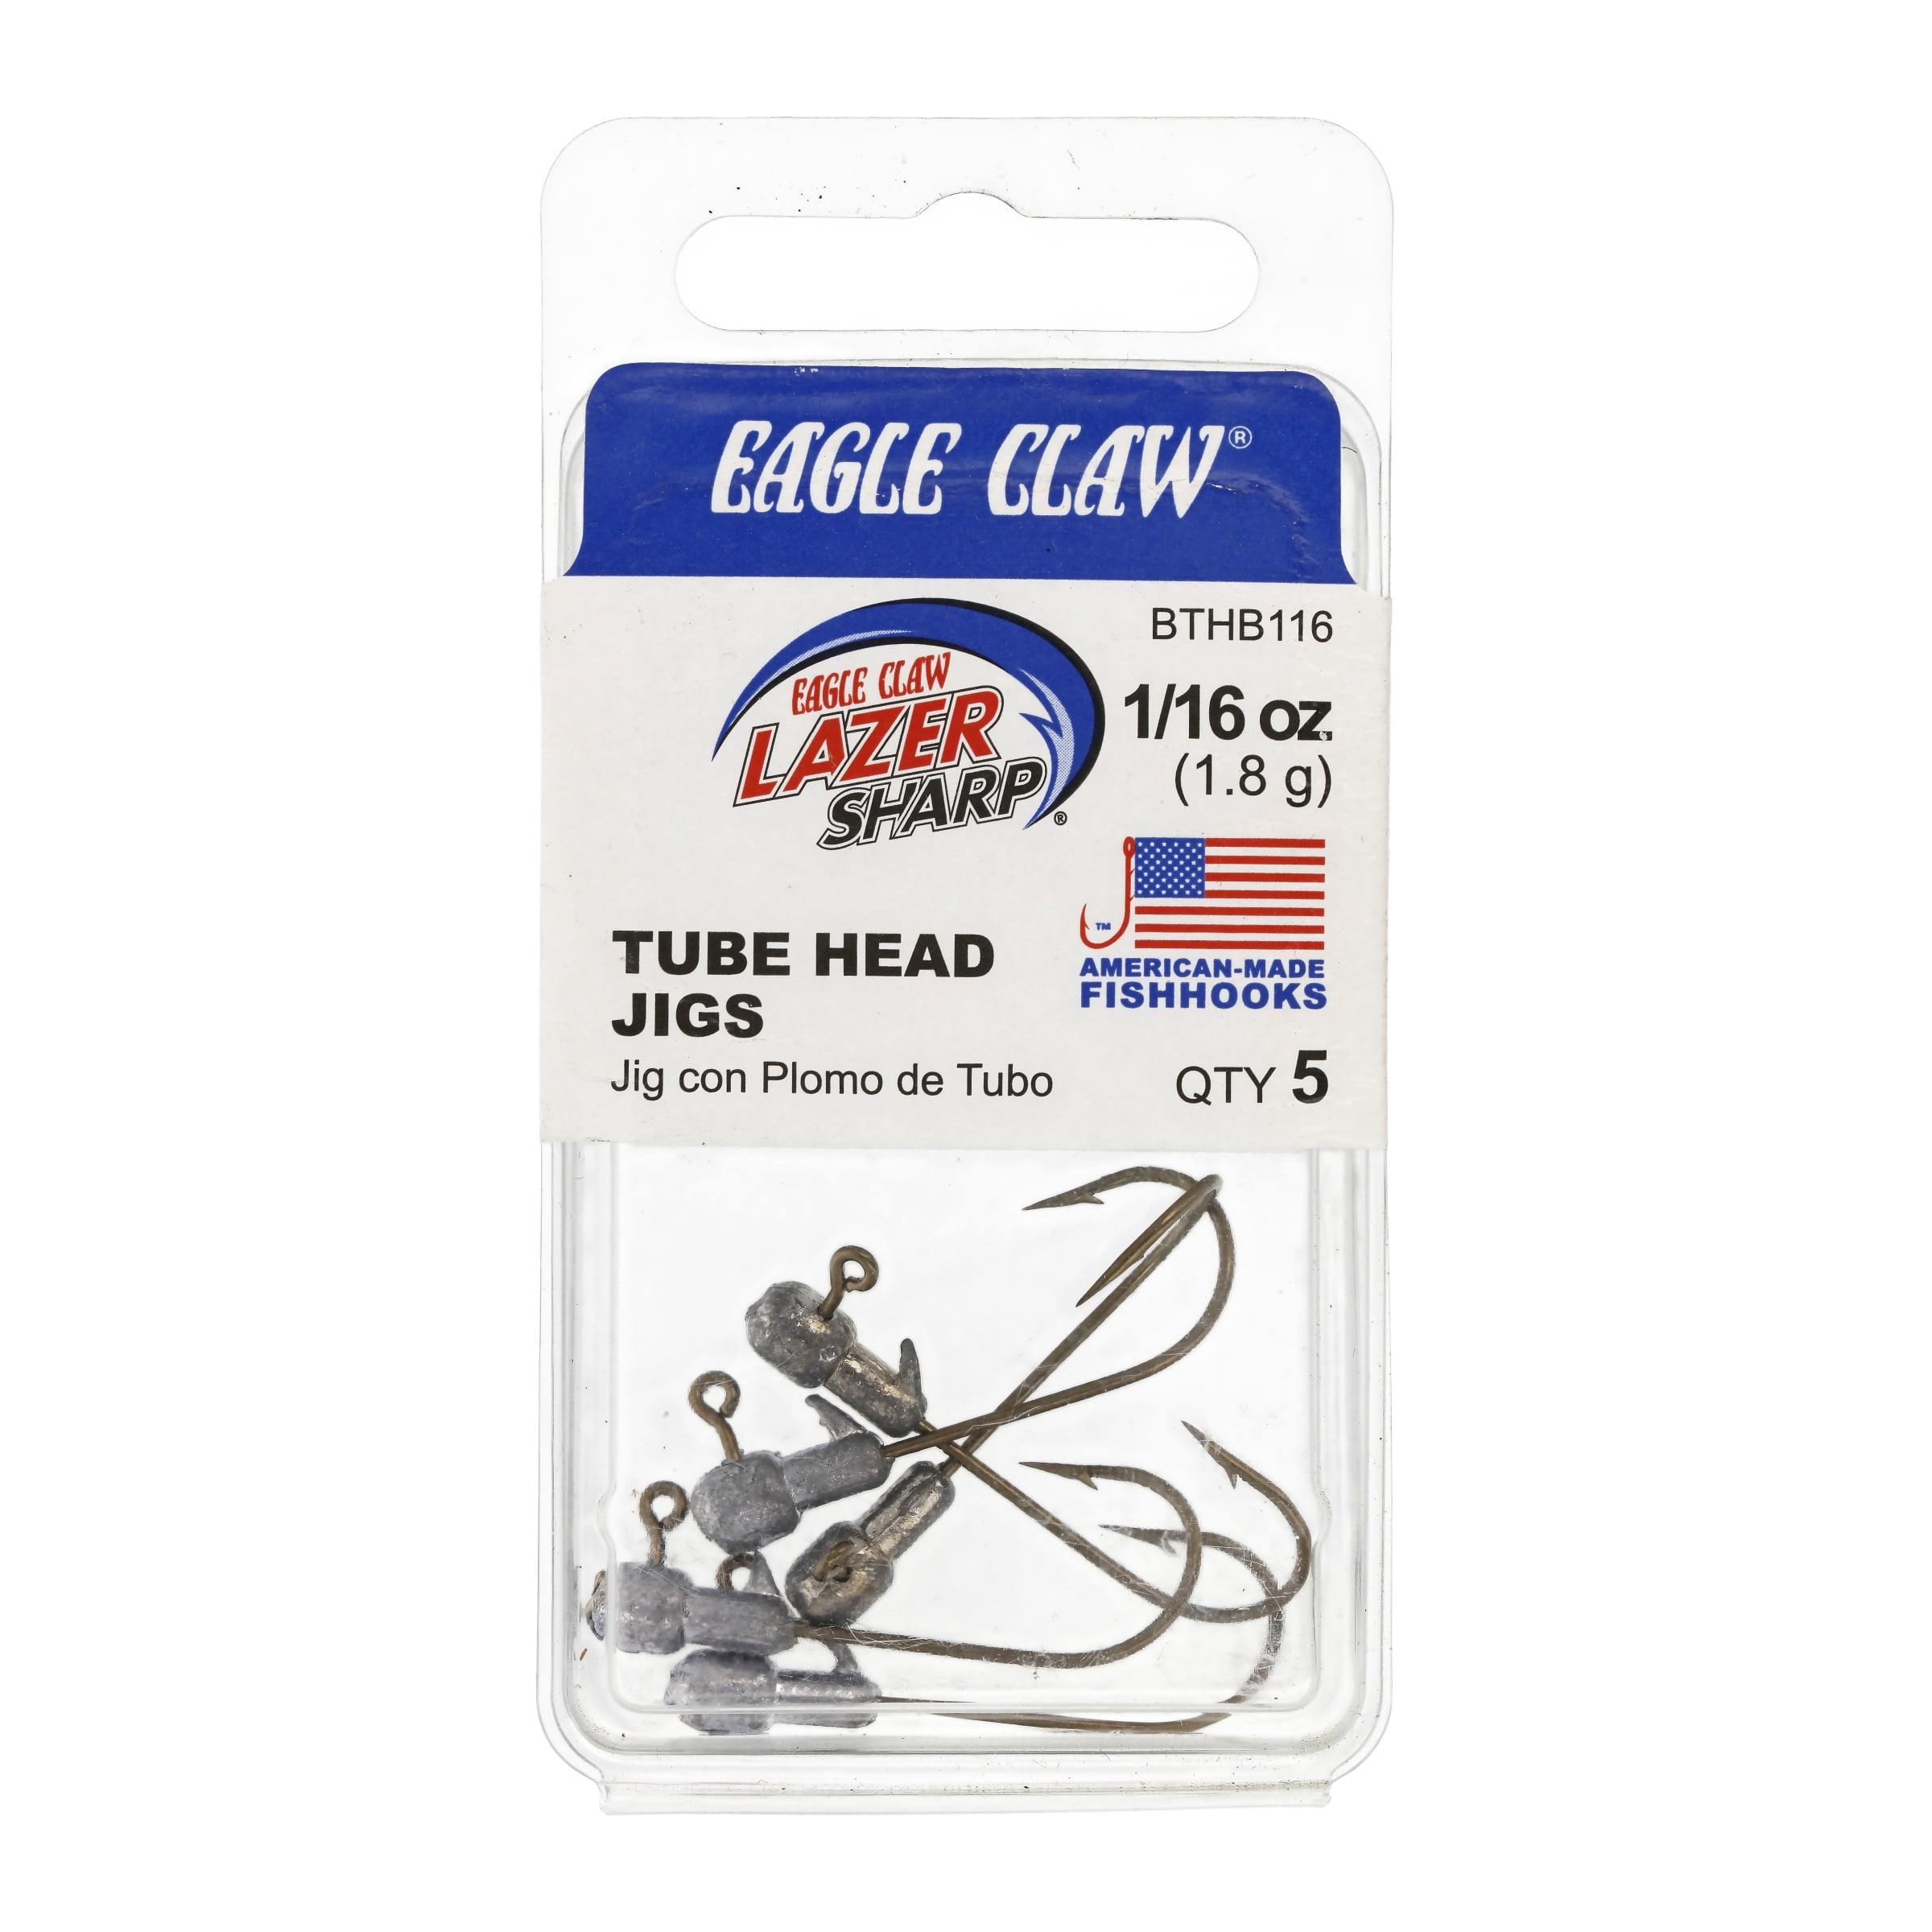 RED 100ct 3/16oz #1/0 ROUND HEAD TAPERED BARB LEAD HEAD JIG EAGLE CLAW 